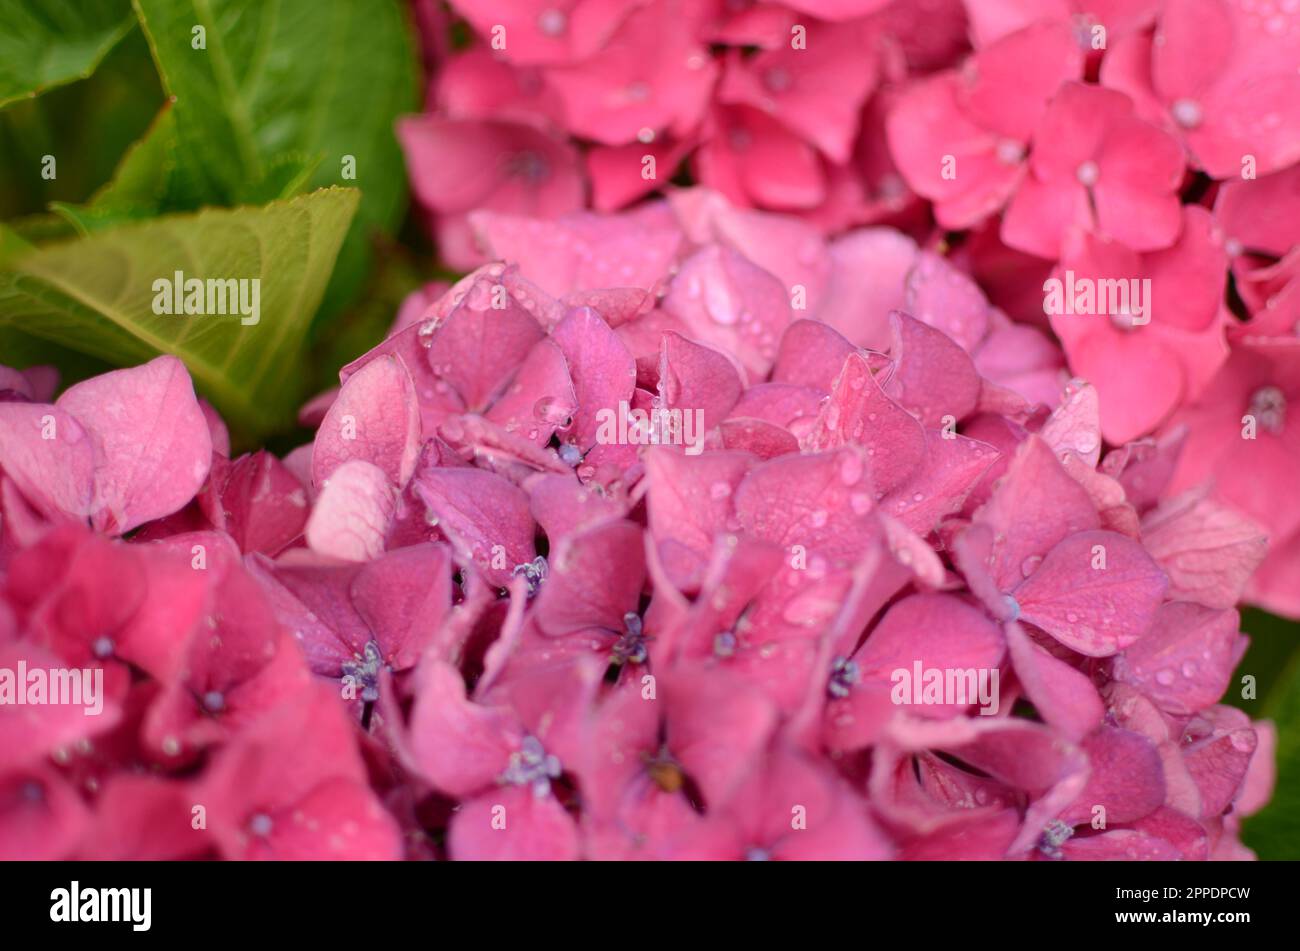 Pink Hydrangea Flowers With Water Droplets. Stock Photo